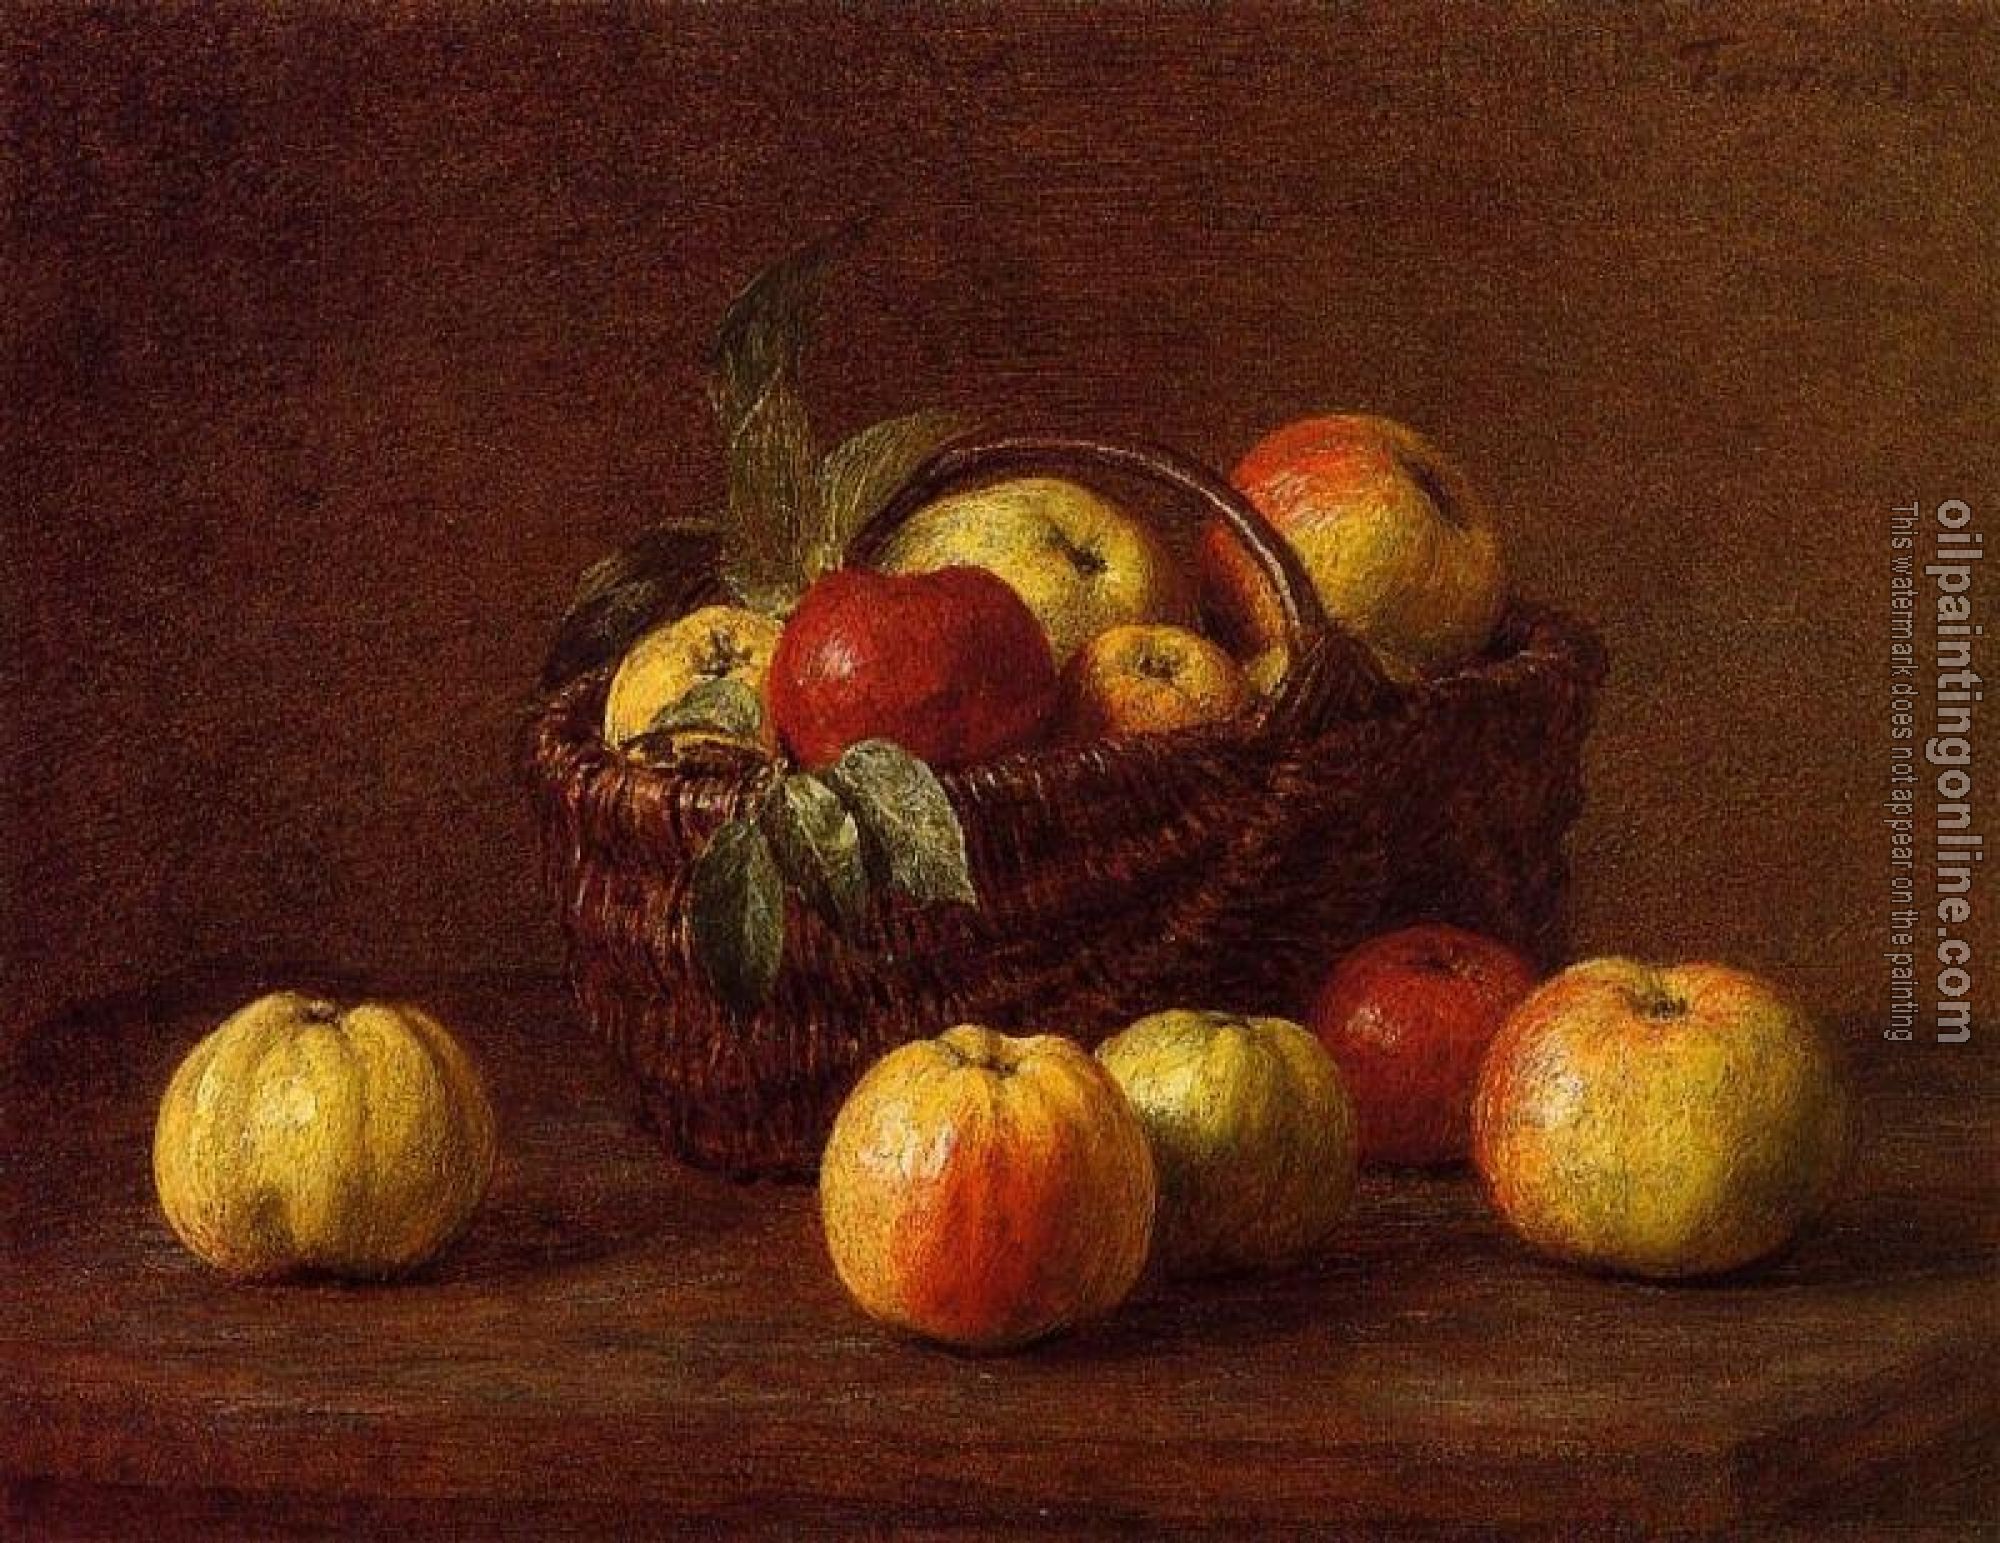 Fantin-Latour, Henri - Apples in a Basket on a Table